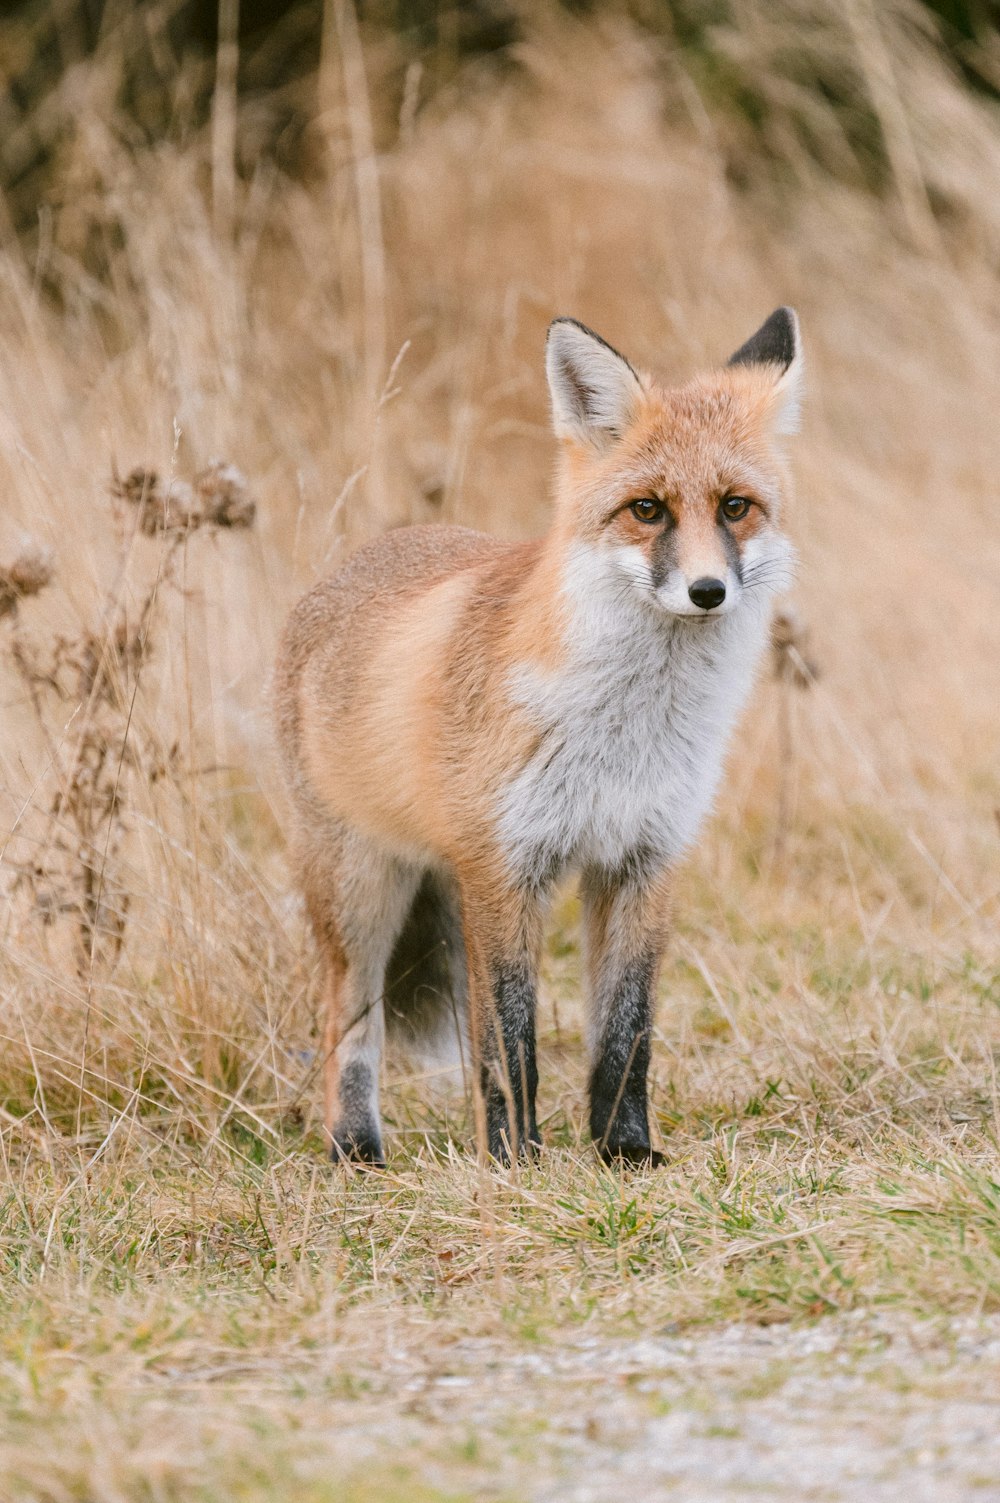 a red fox standing in a grassy field